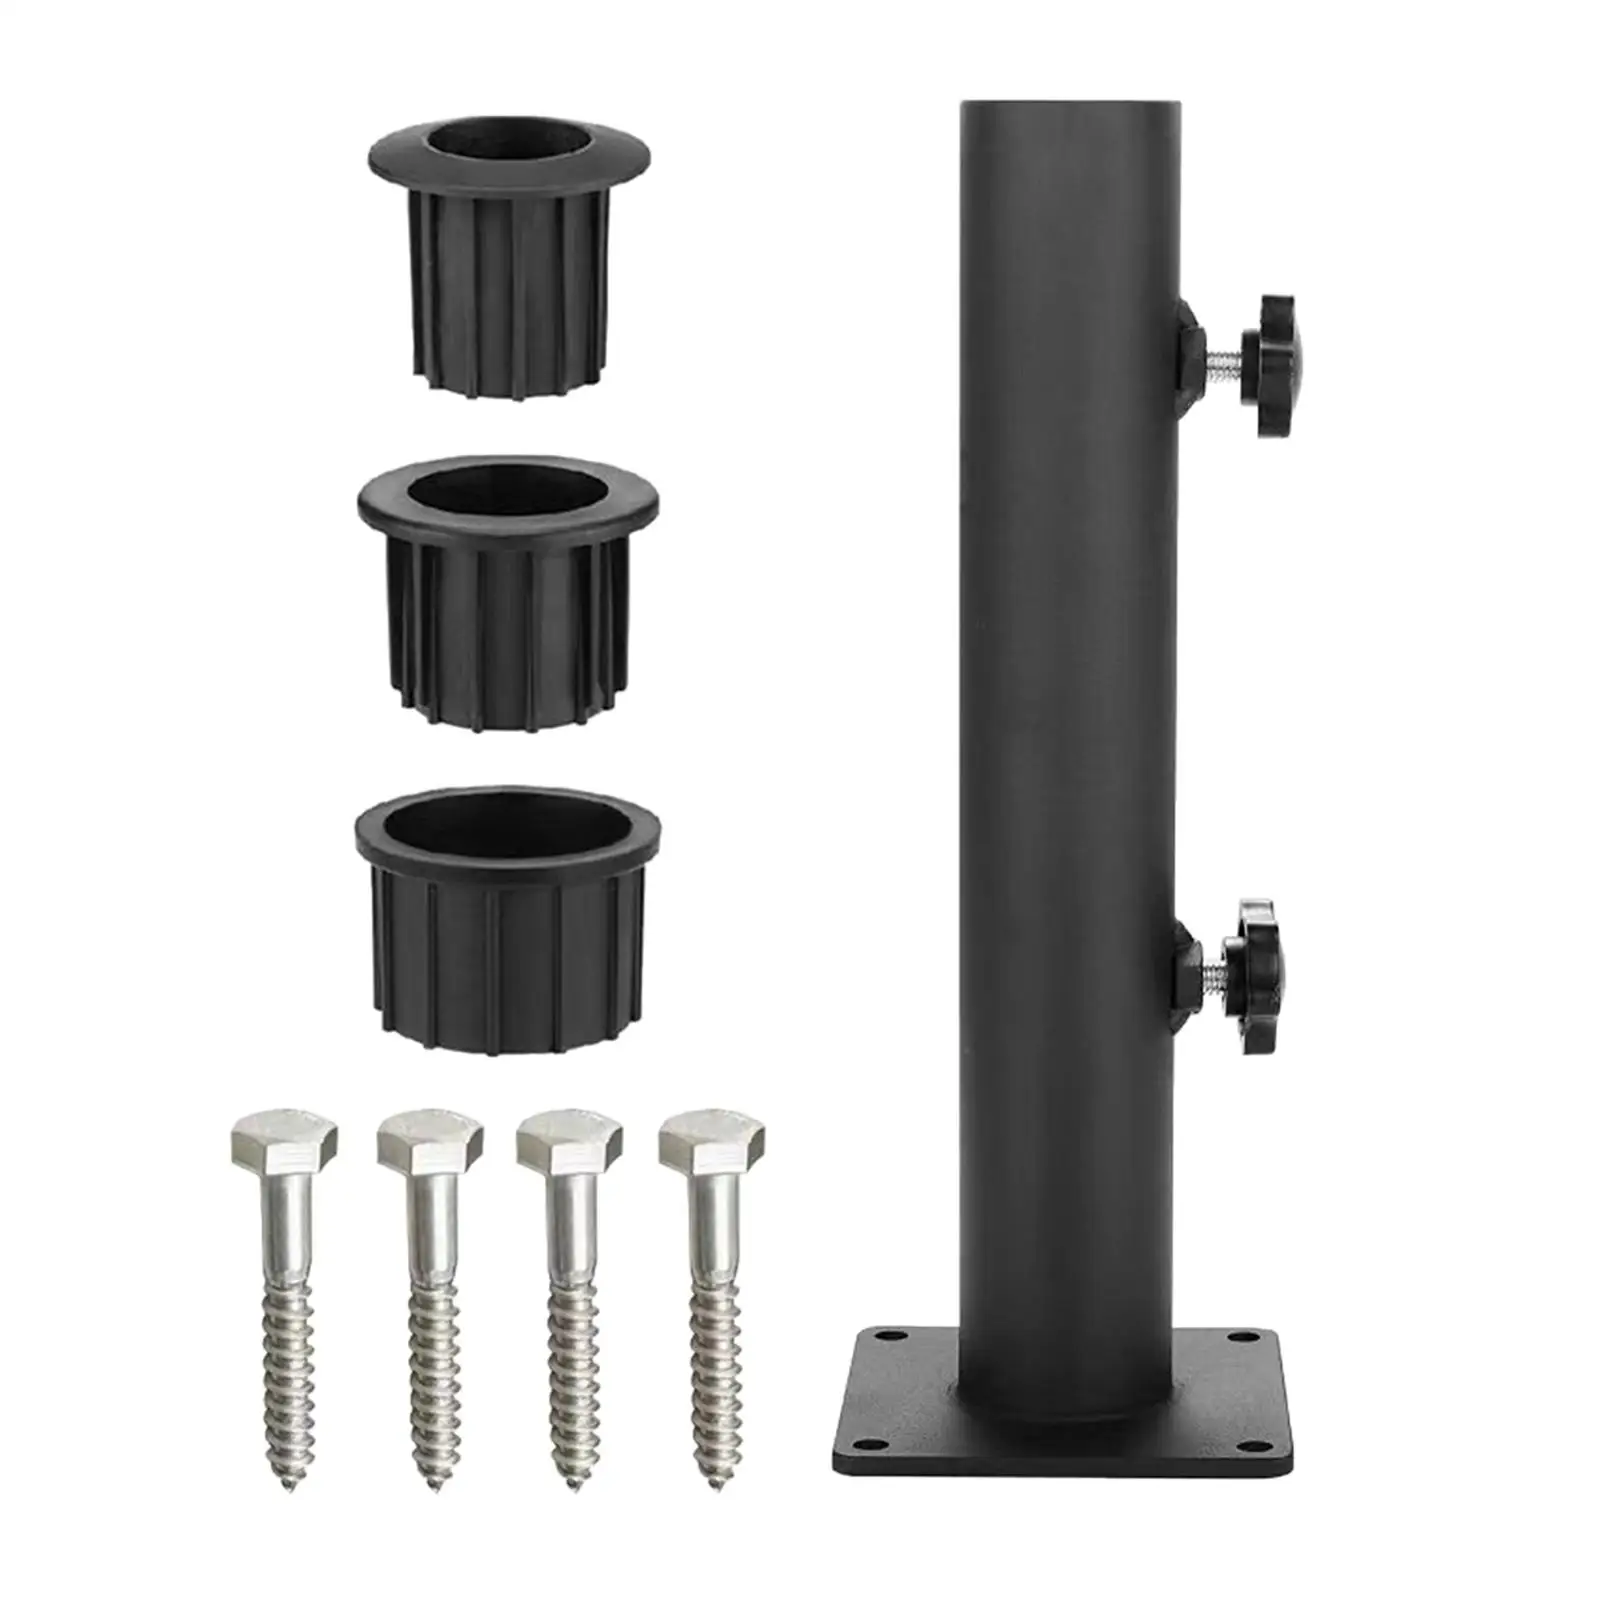 Umbrella Base Stand Easily to Install Strong Heavy Duty Hand Knob Patio Umbrella Stand Mount for Outside Courtyard Patio Outdoor